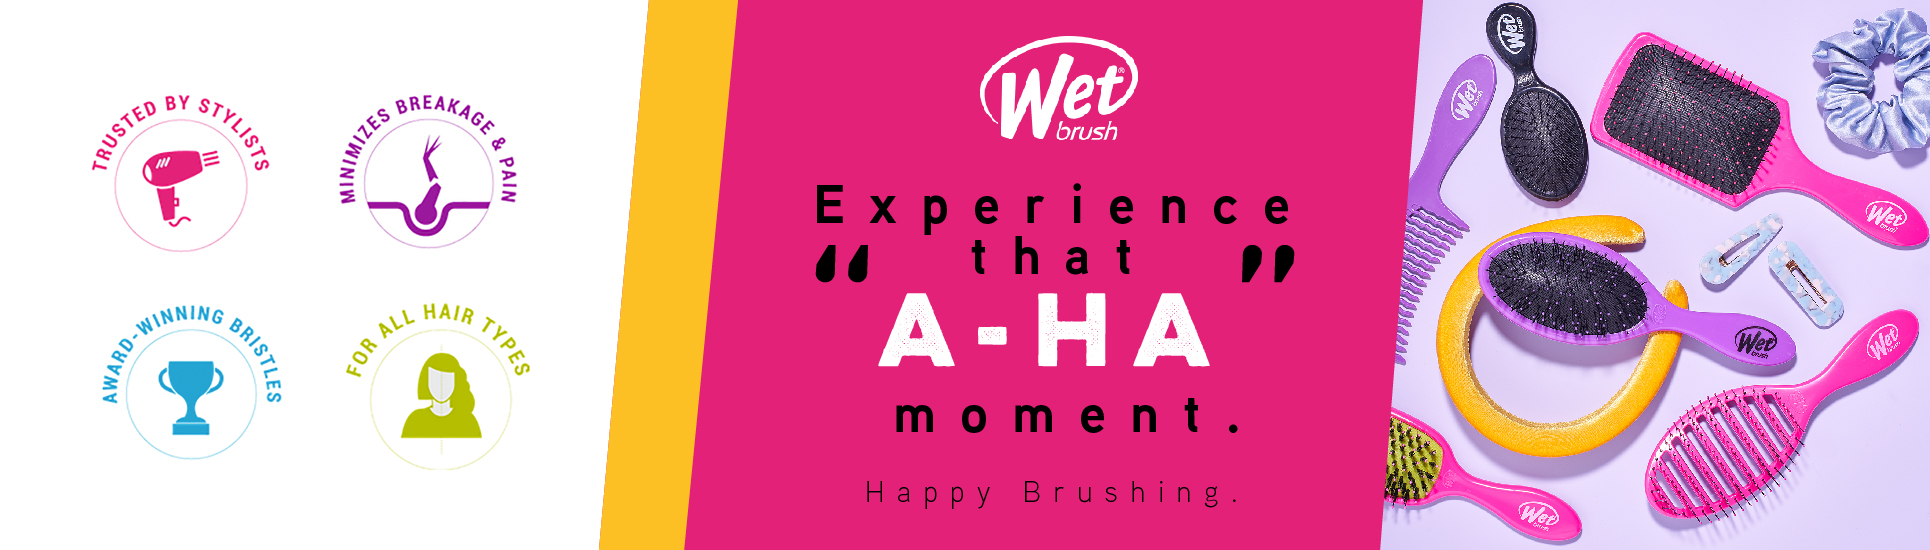 Brand Page Featured Banner_WetBrush-01